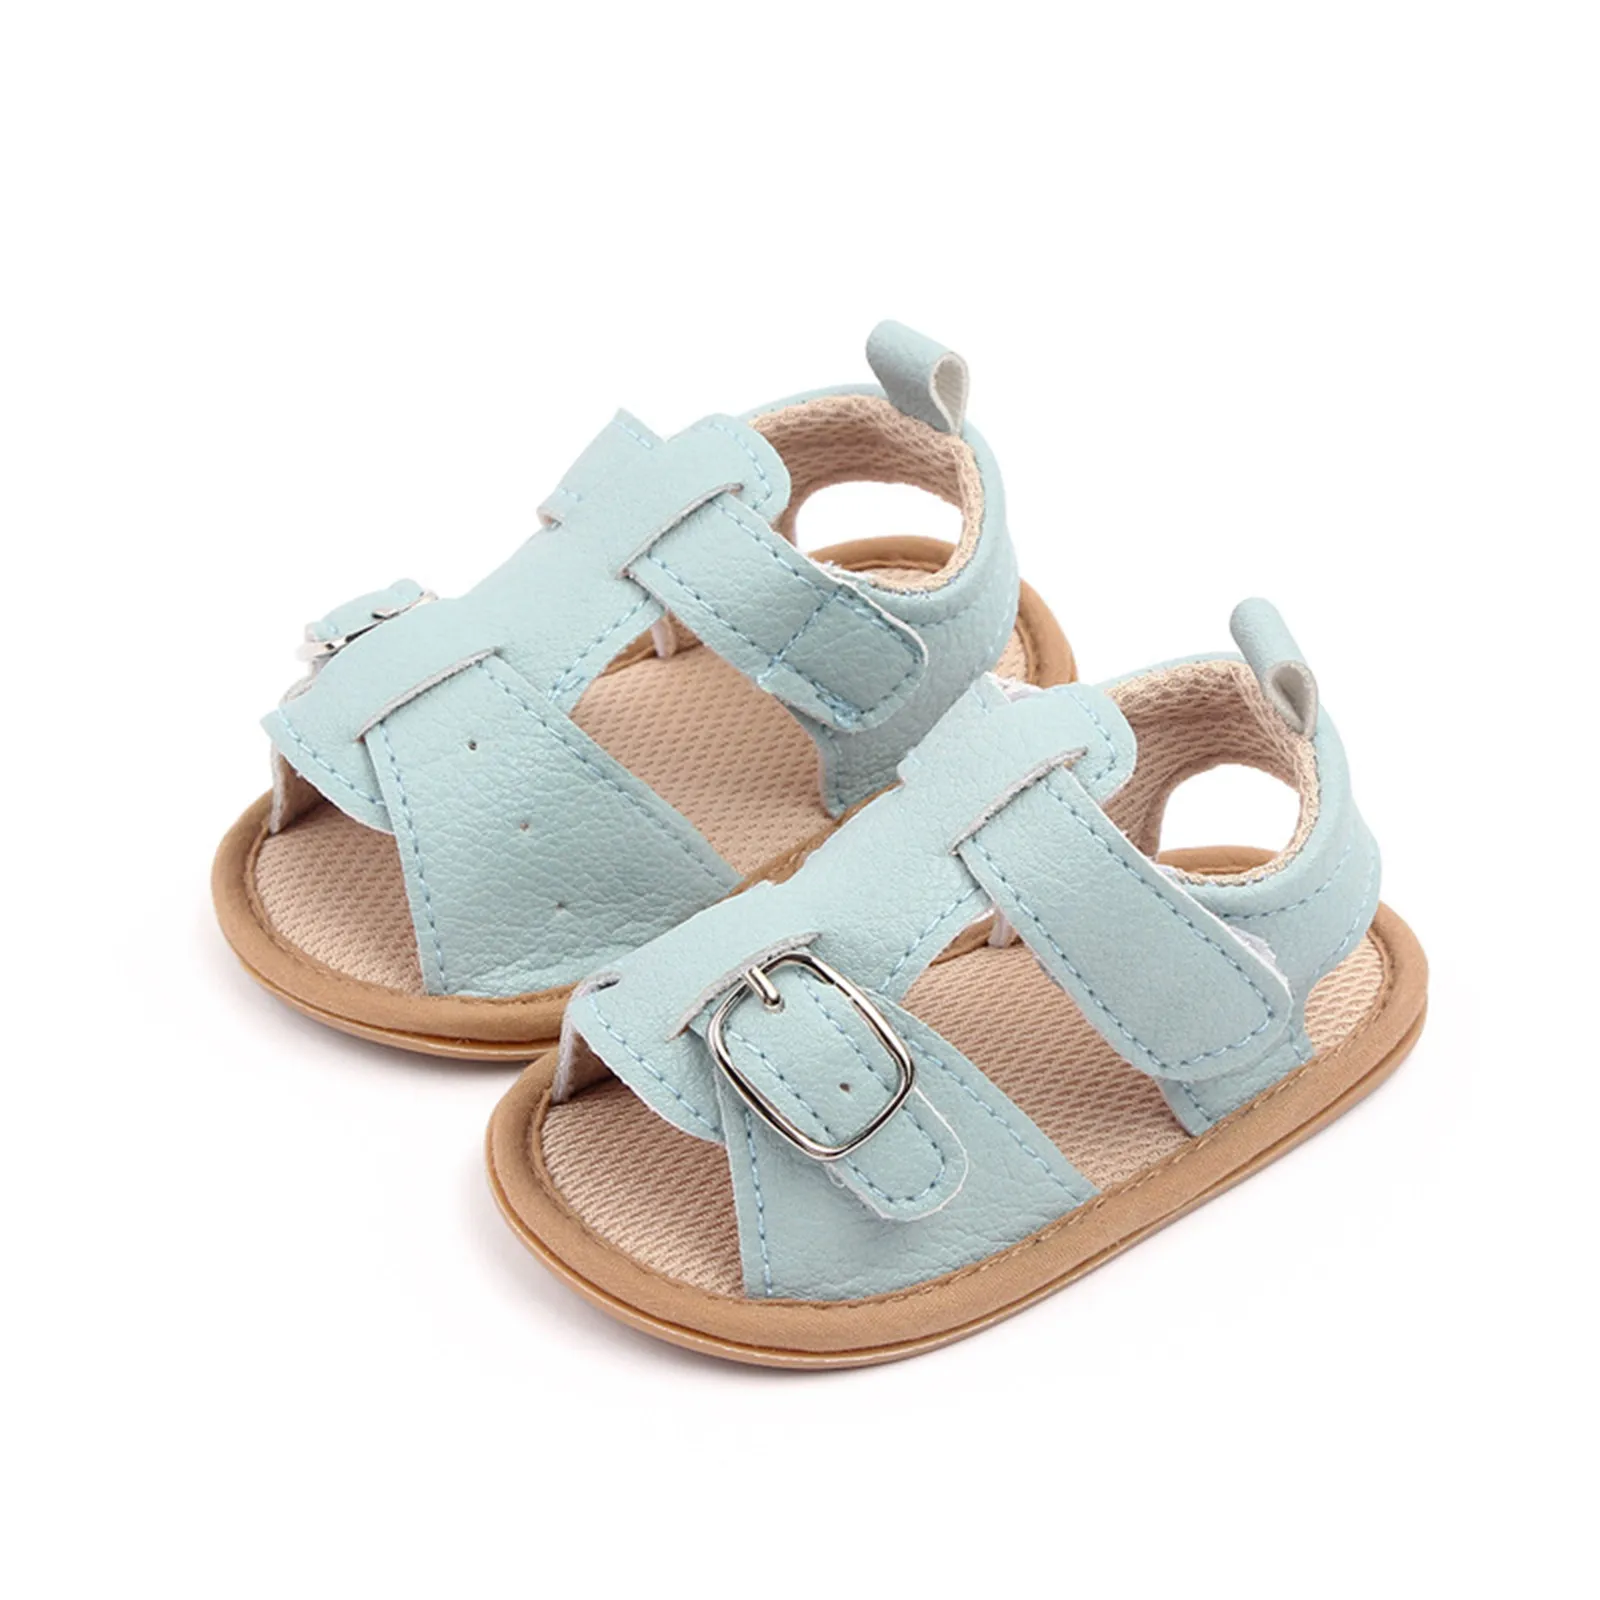 3-18 Months Infant Baby Summer Sandals Soft Solid Color Baby Girls Shoes With Buckle Crib Baby Shoes First Walkers Baby Shoes